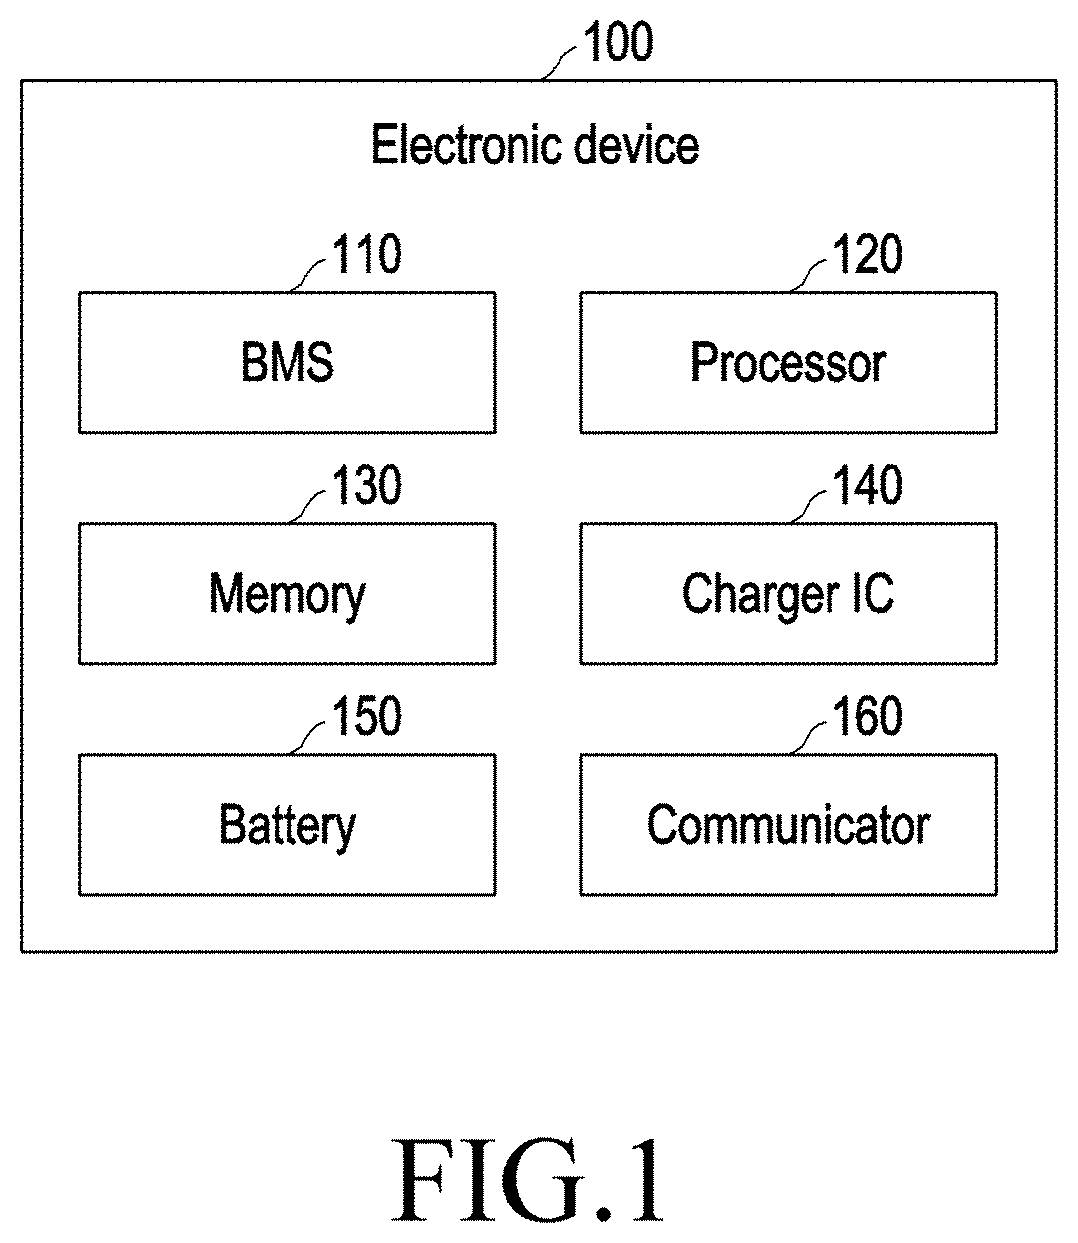 Method and electronic device for real time adaptive charging of battery